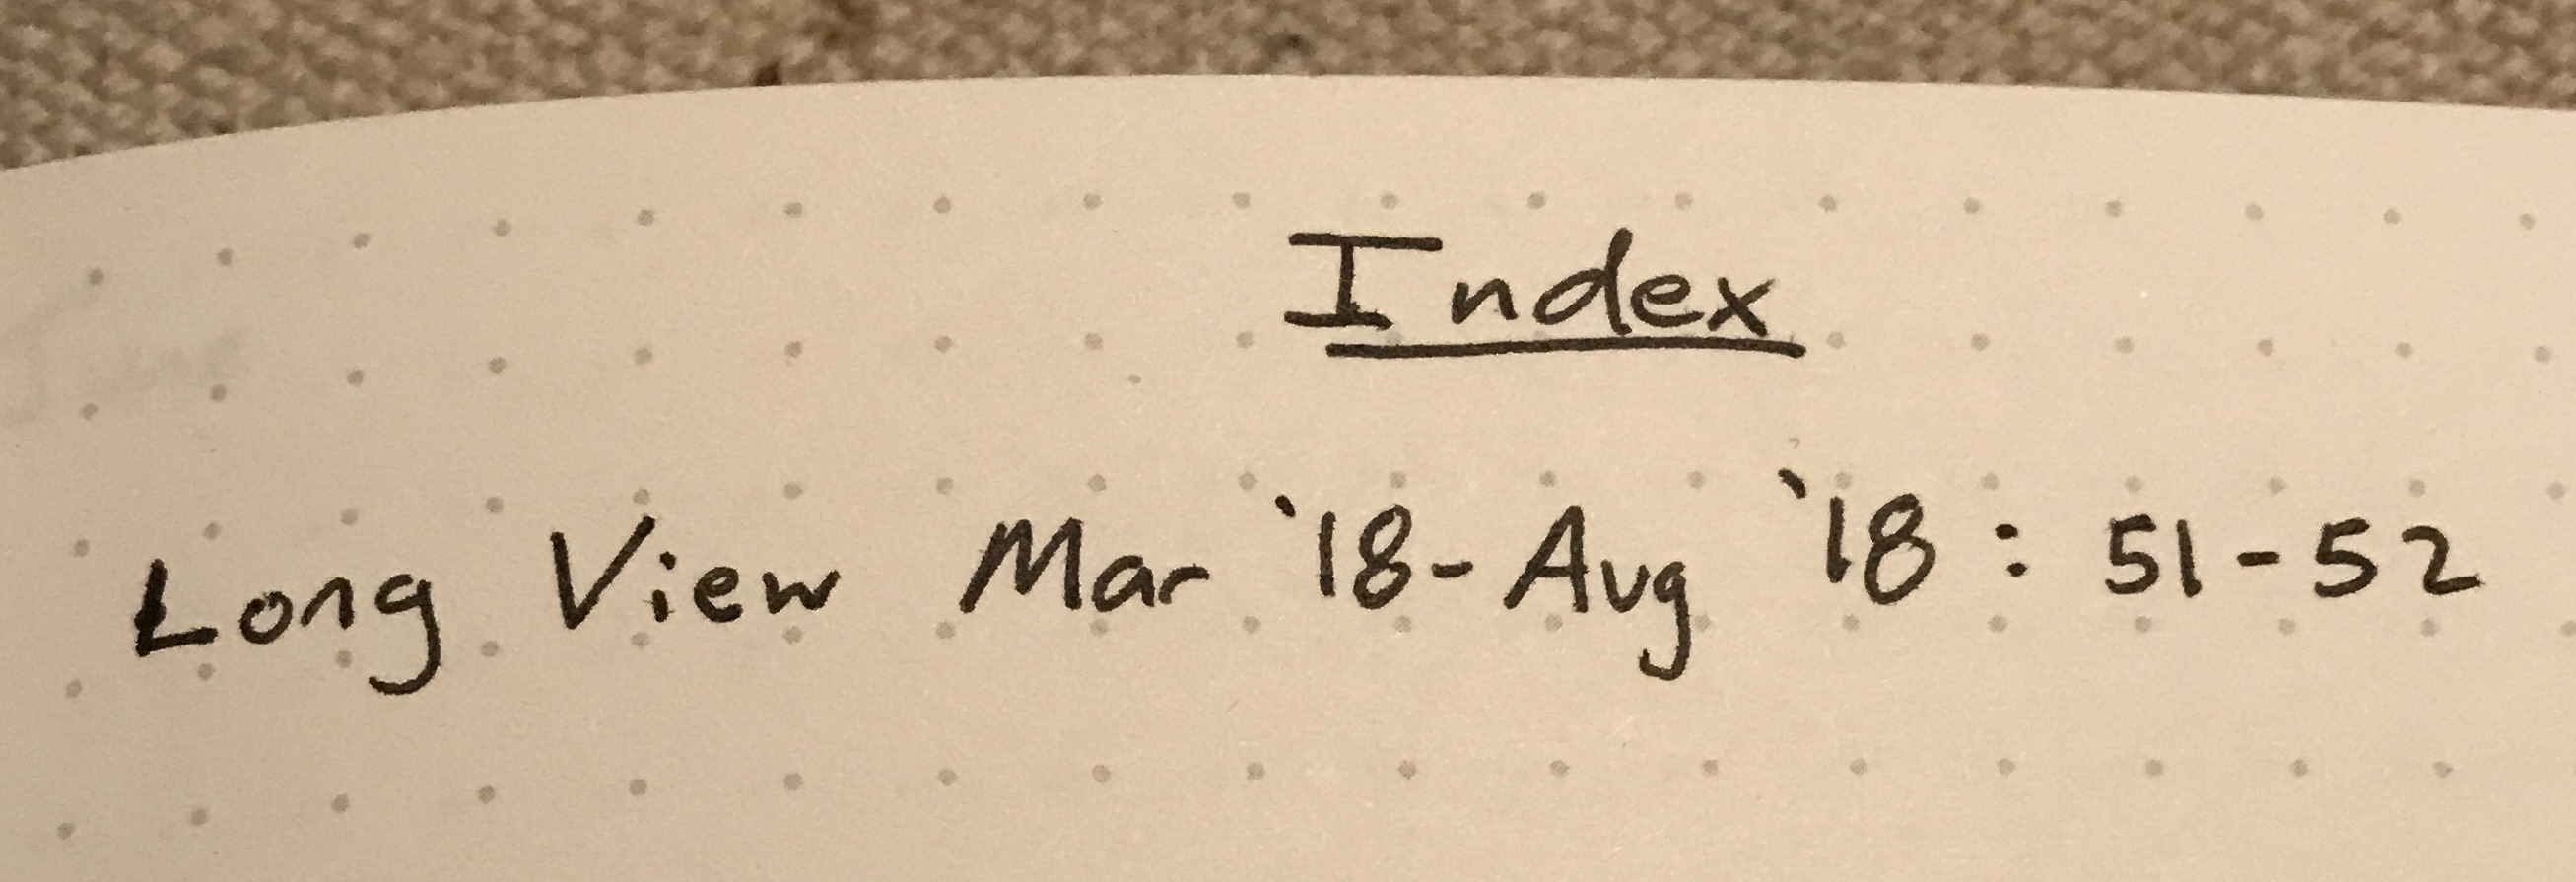 Adding the Long View to the Index